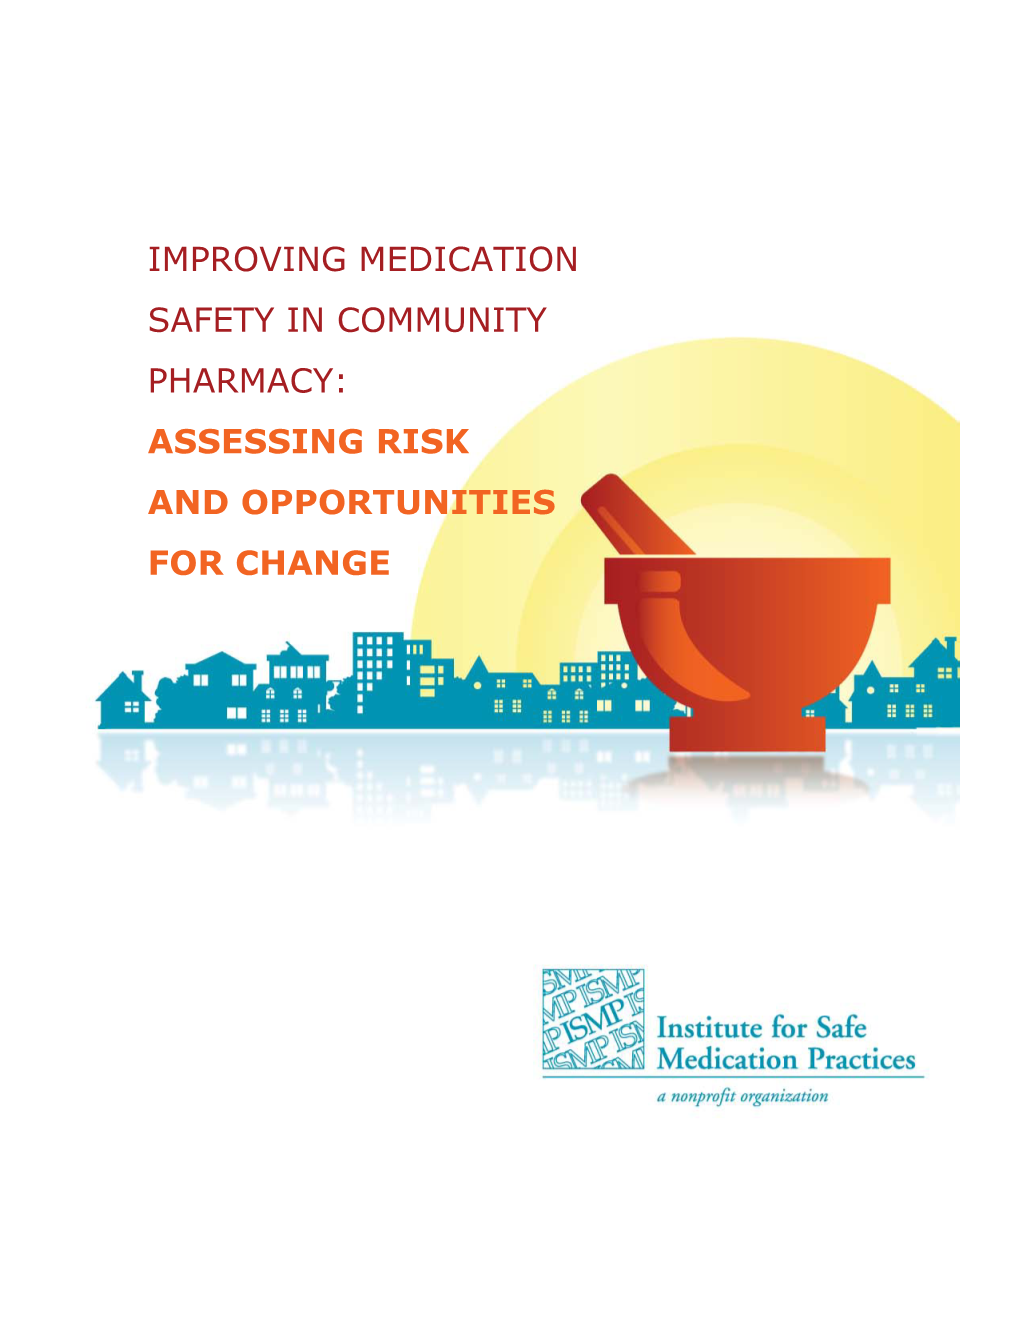 Improving Medication Safety in Community Pharmacy: Assessing Risk and Opportunities for Change